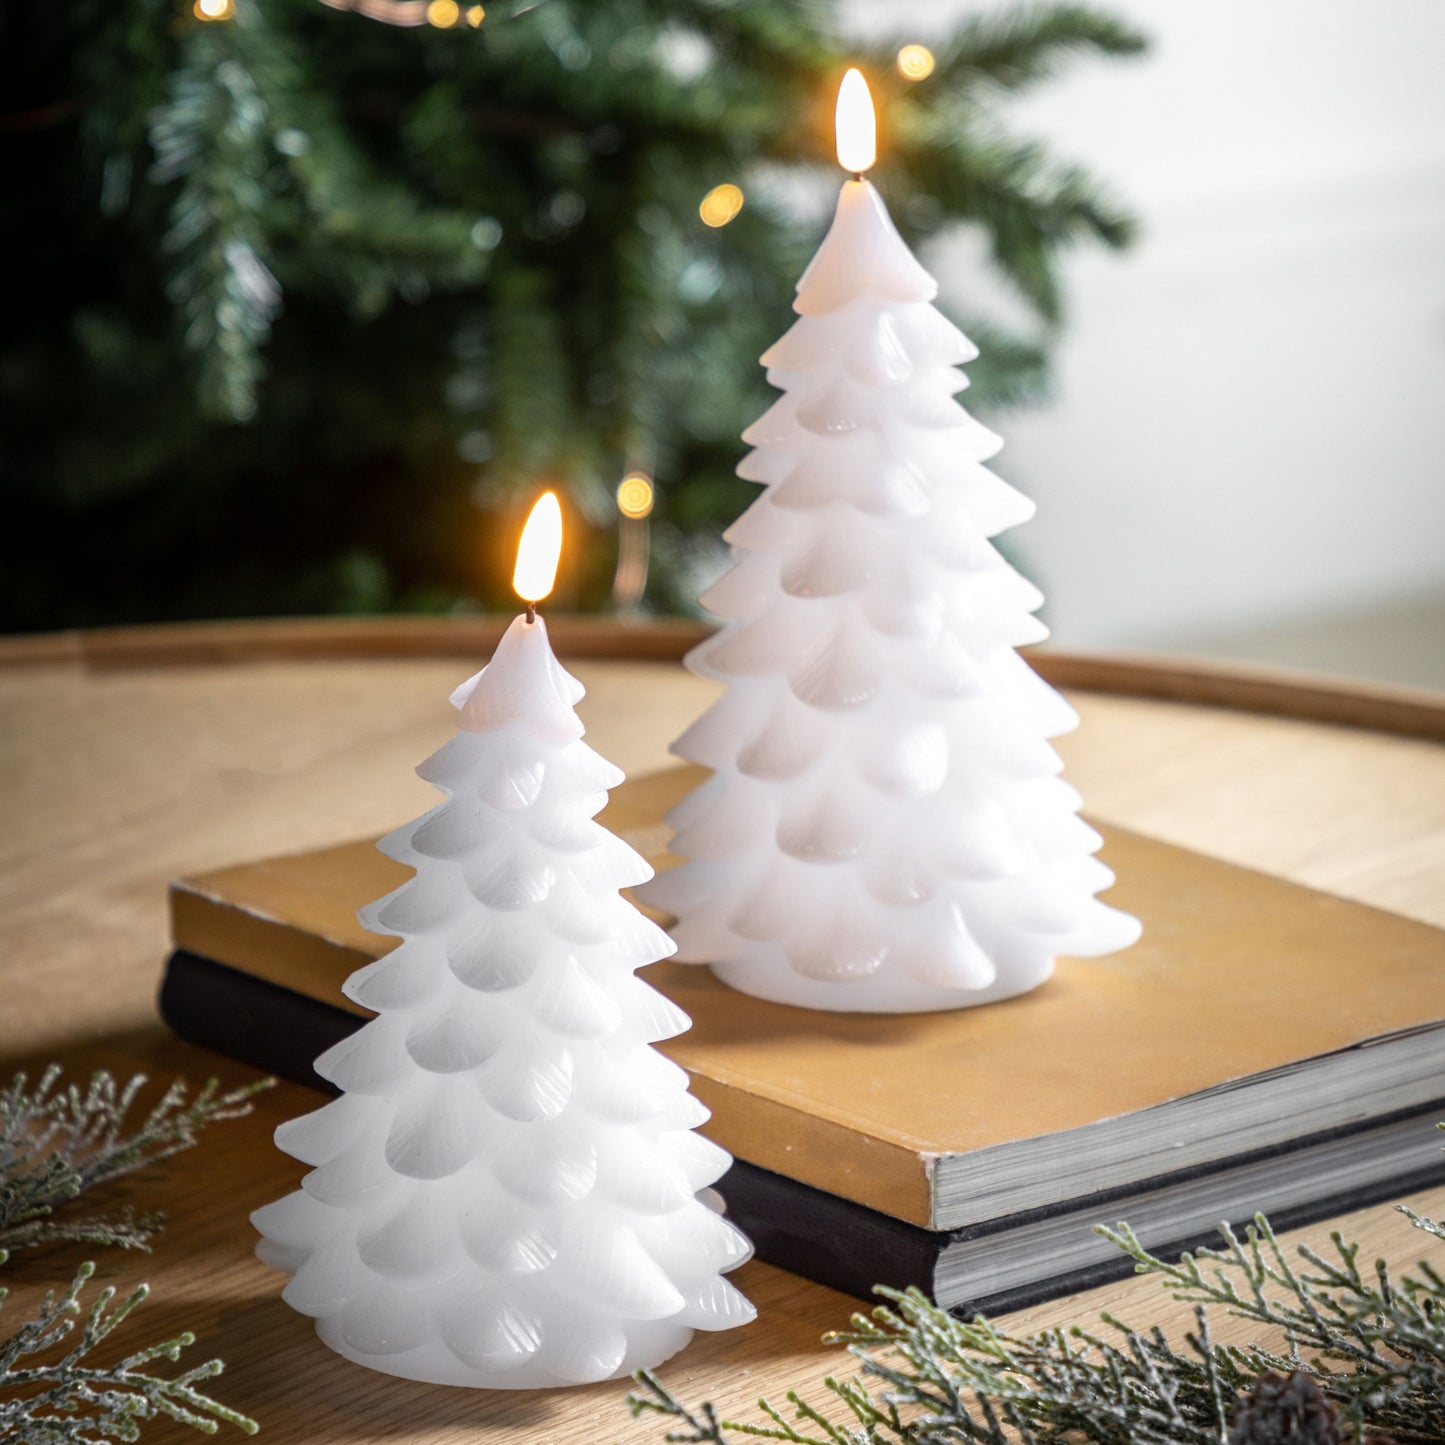 Gallery Interiors Set of 2 LED Xmas Tree Candles in White